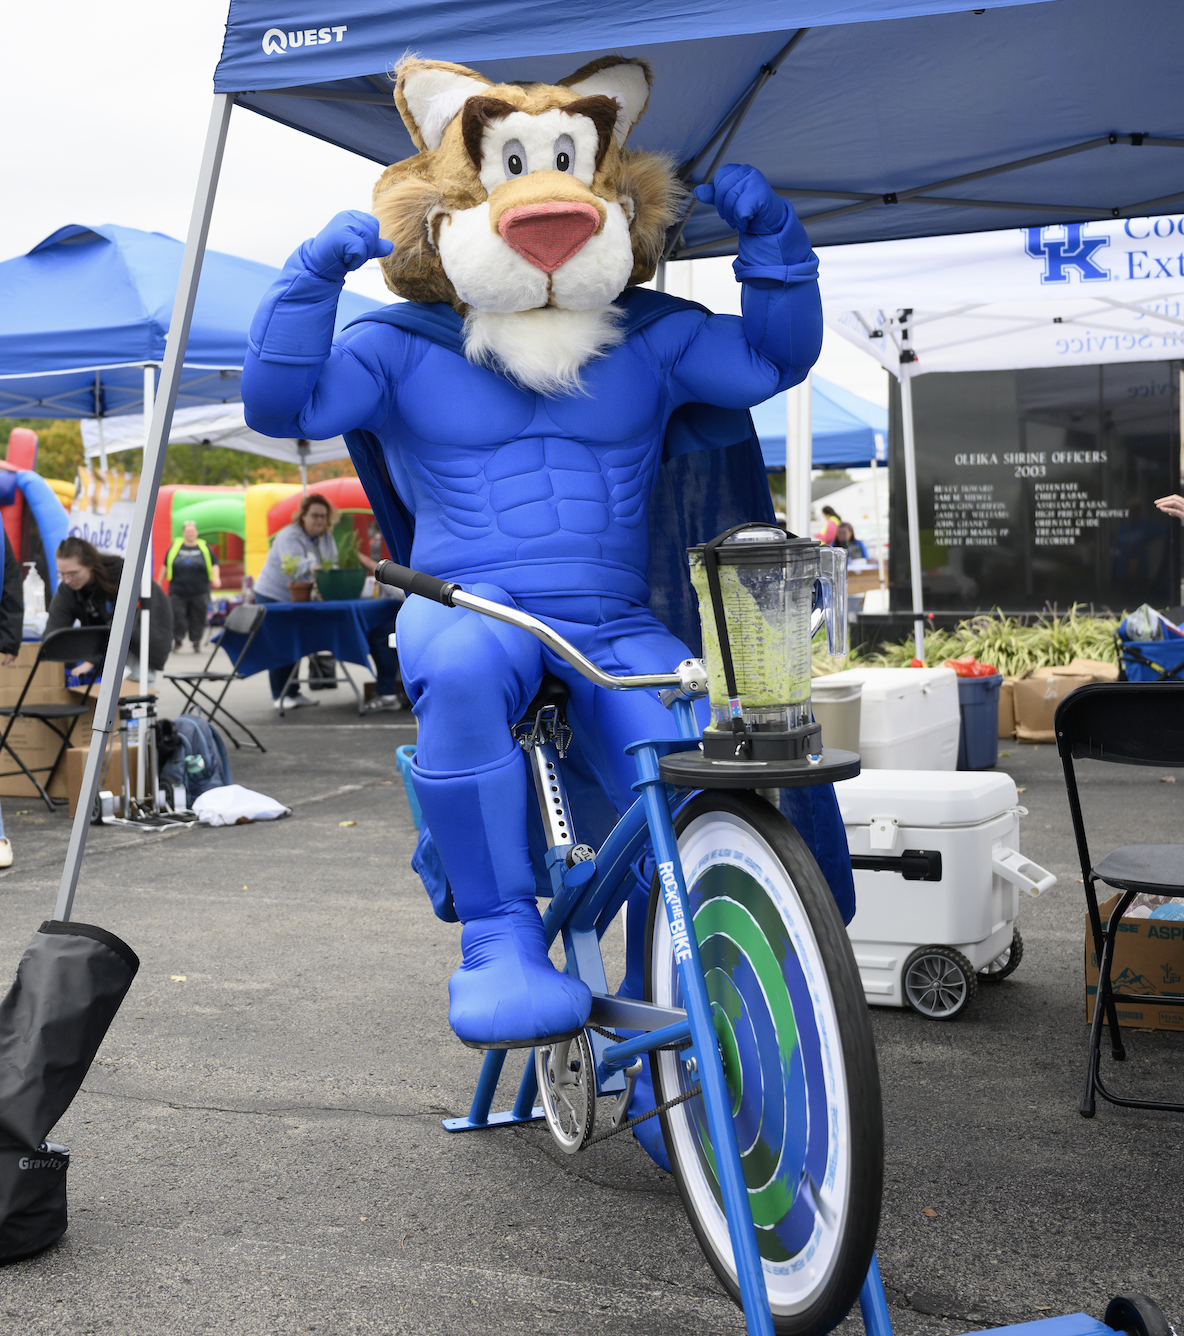 Wally Cat riding the smoothie bike at a festival. 